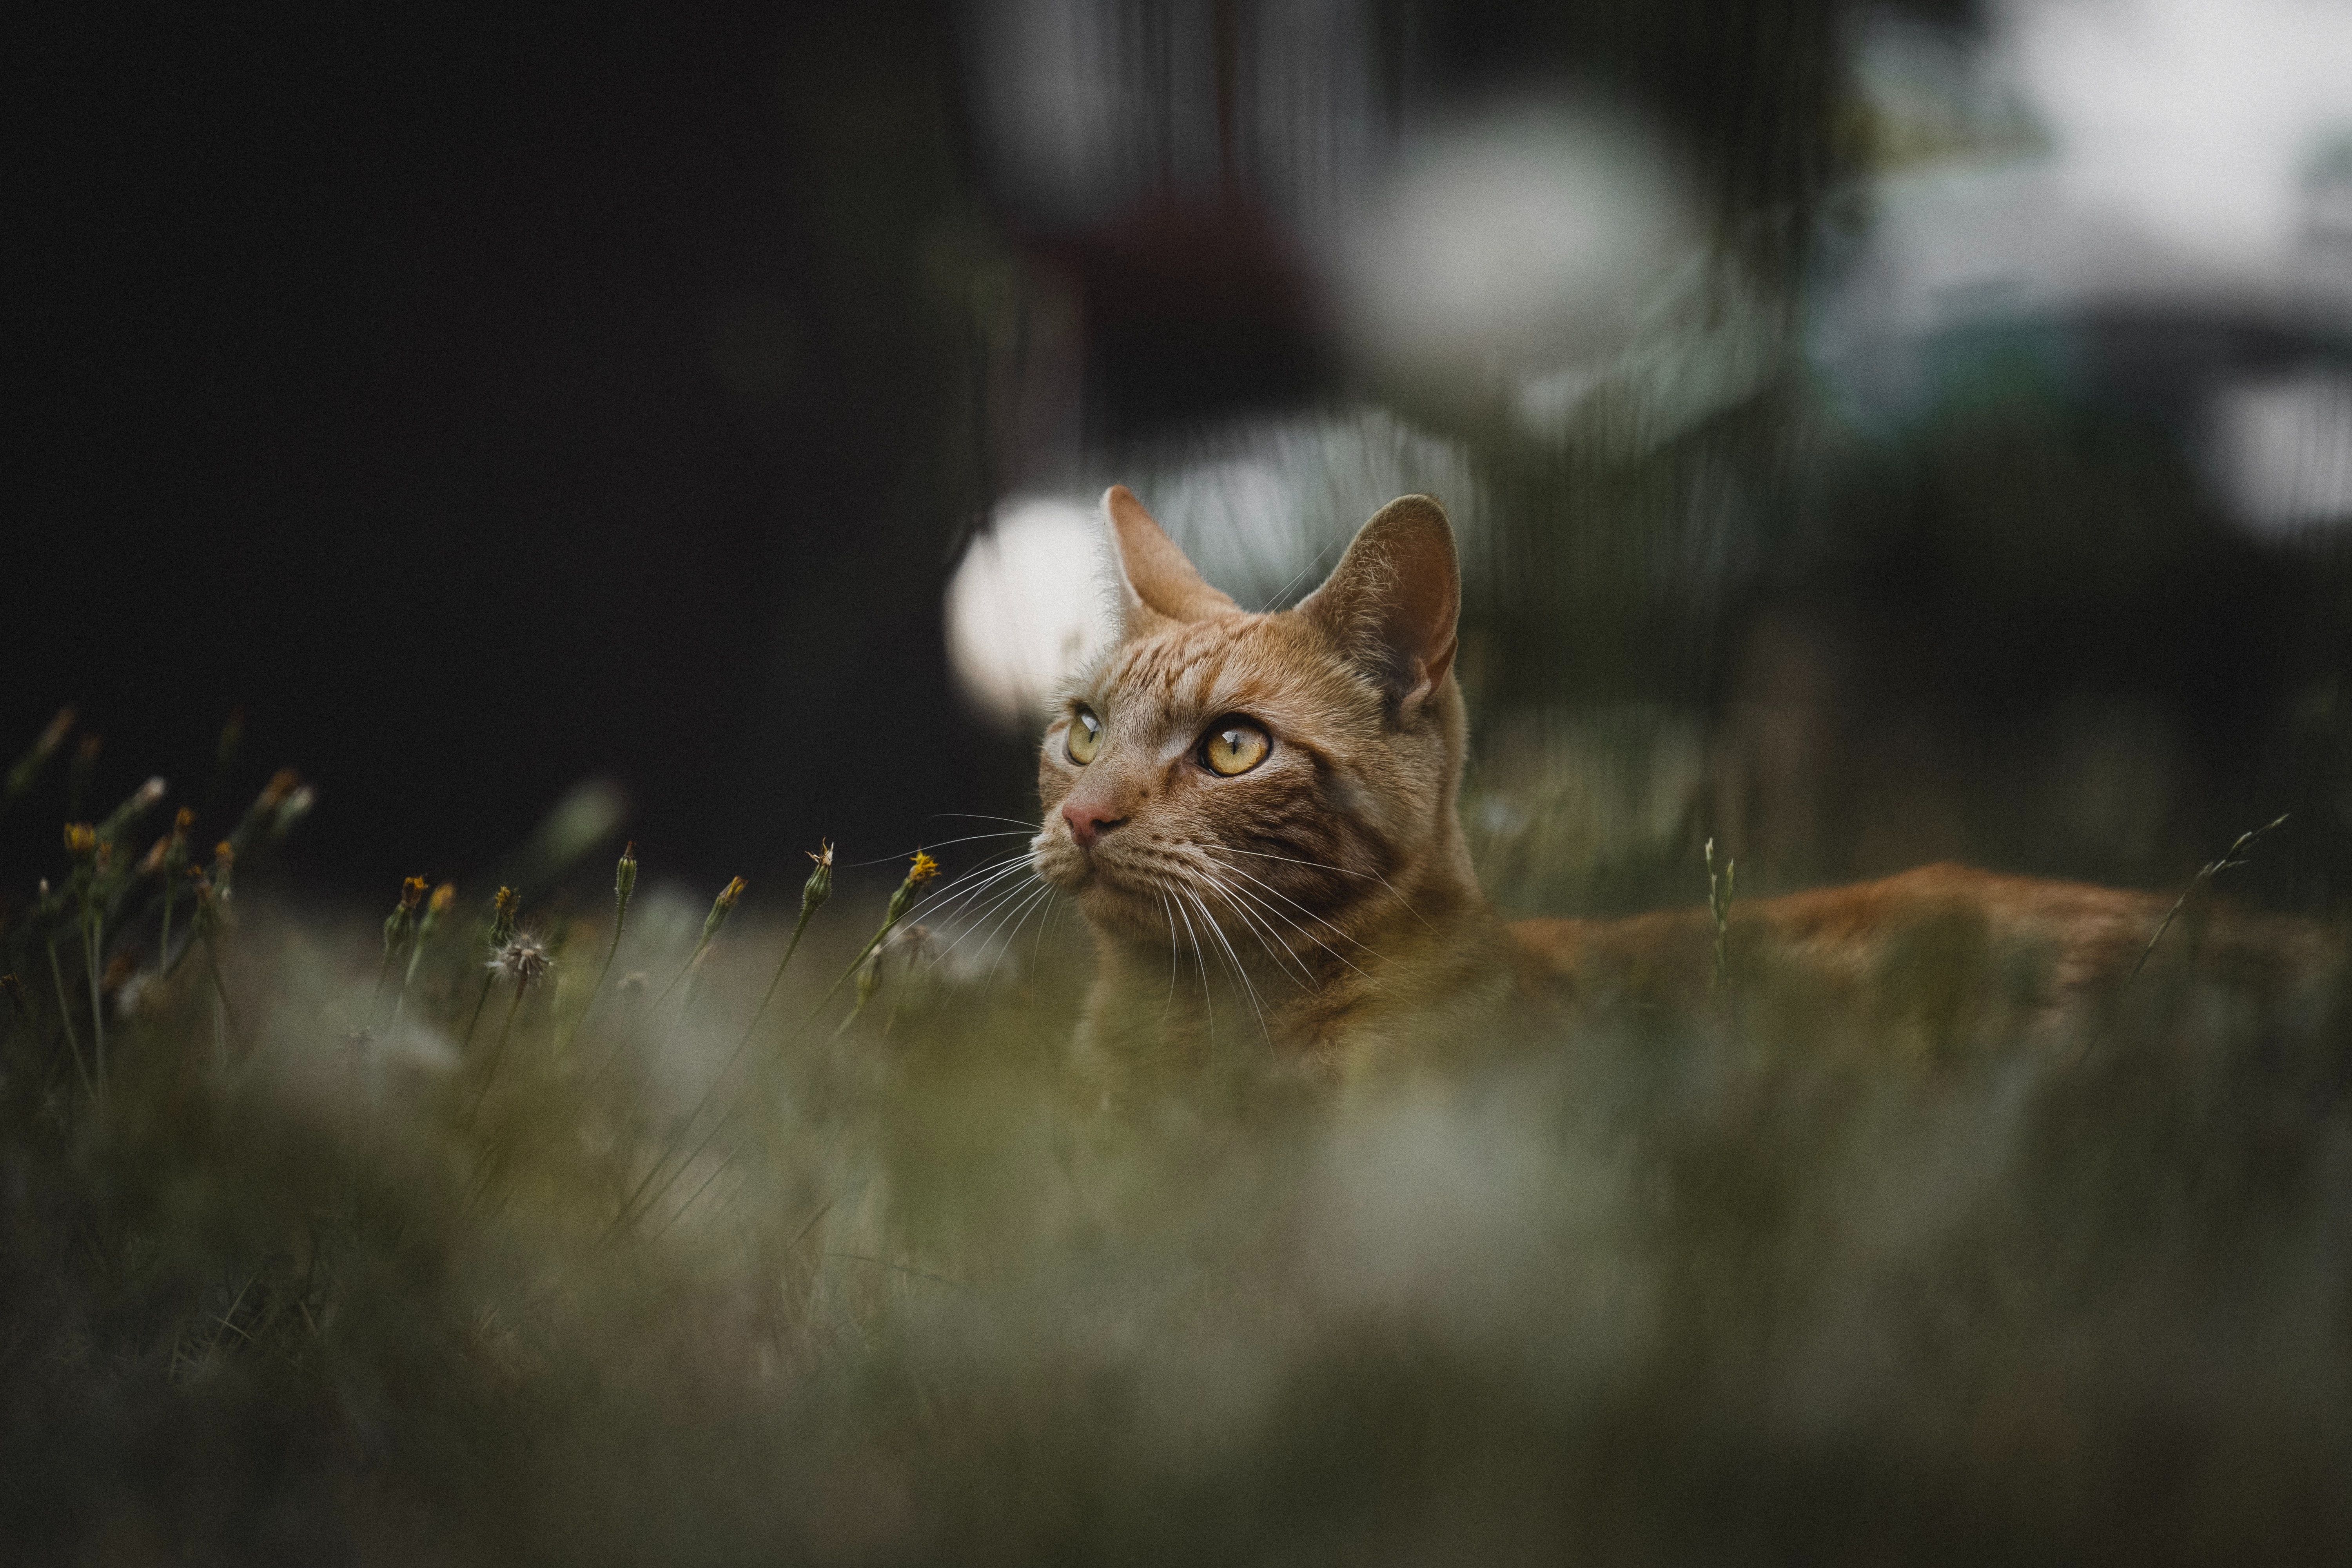 A photo of a cat sitting in the grass.